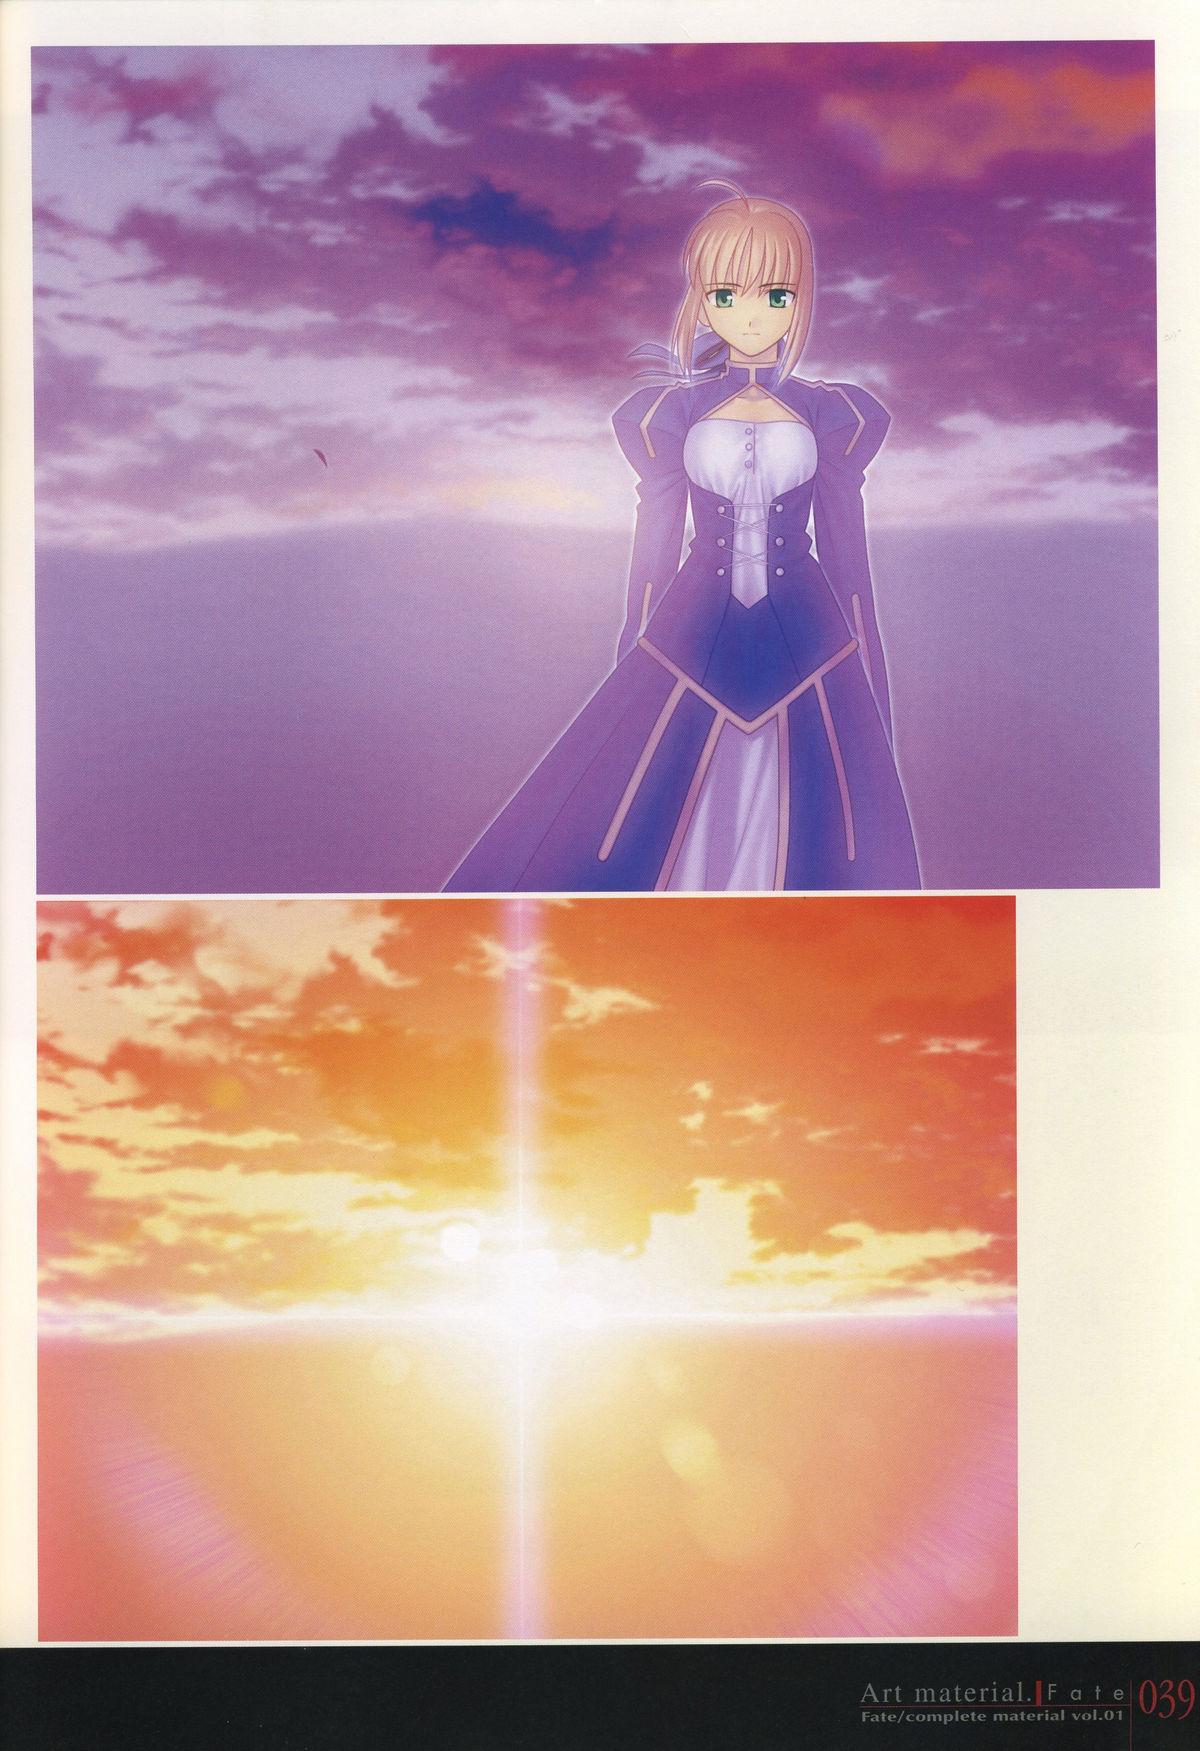 Fate/complete material I - Art material. 43